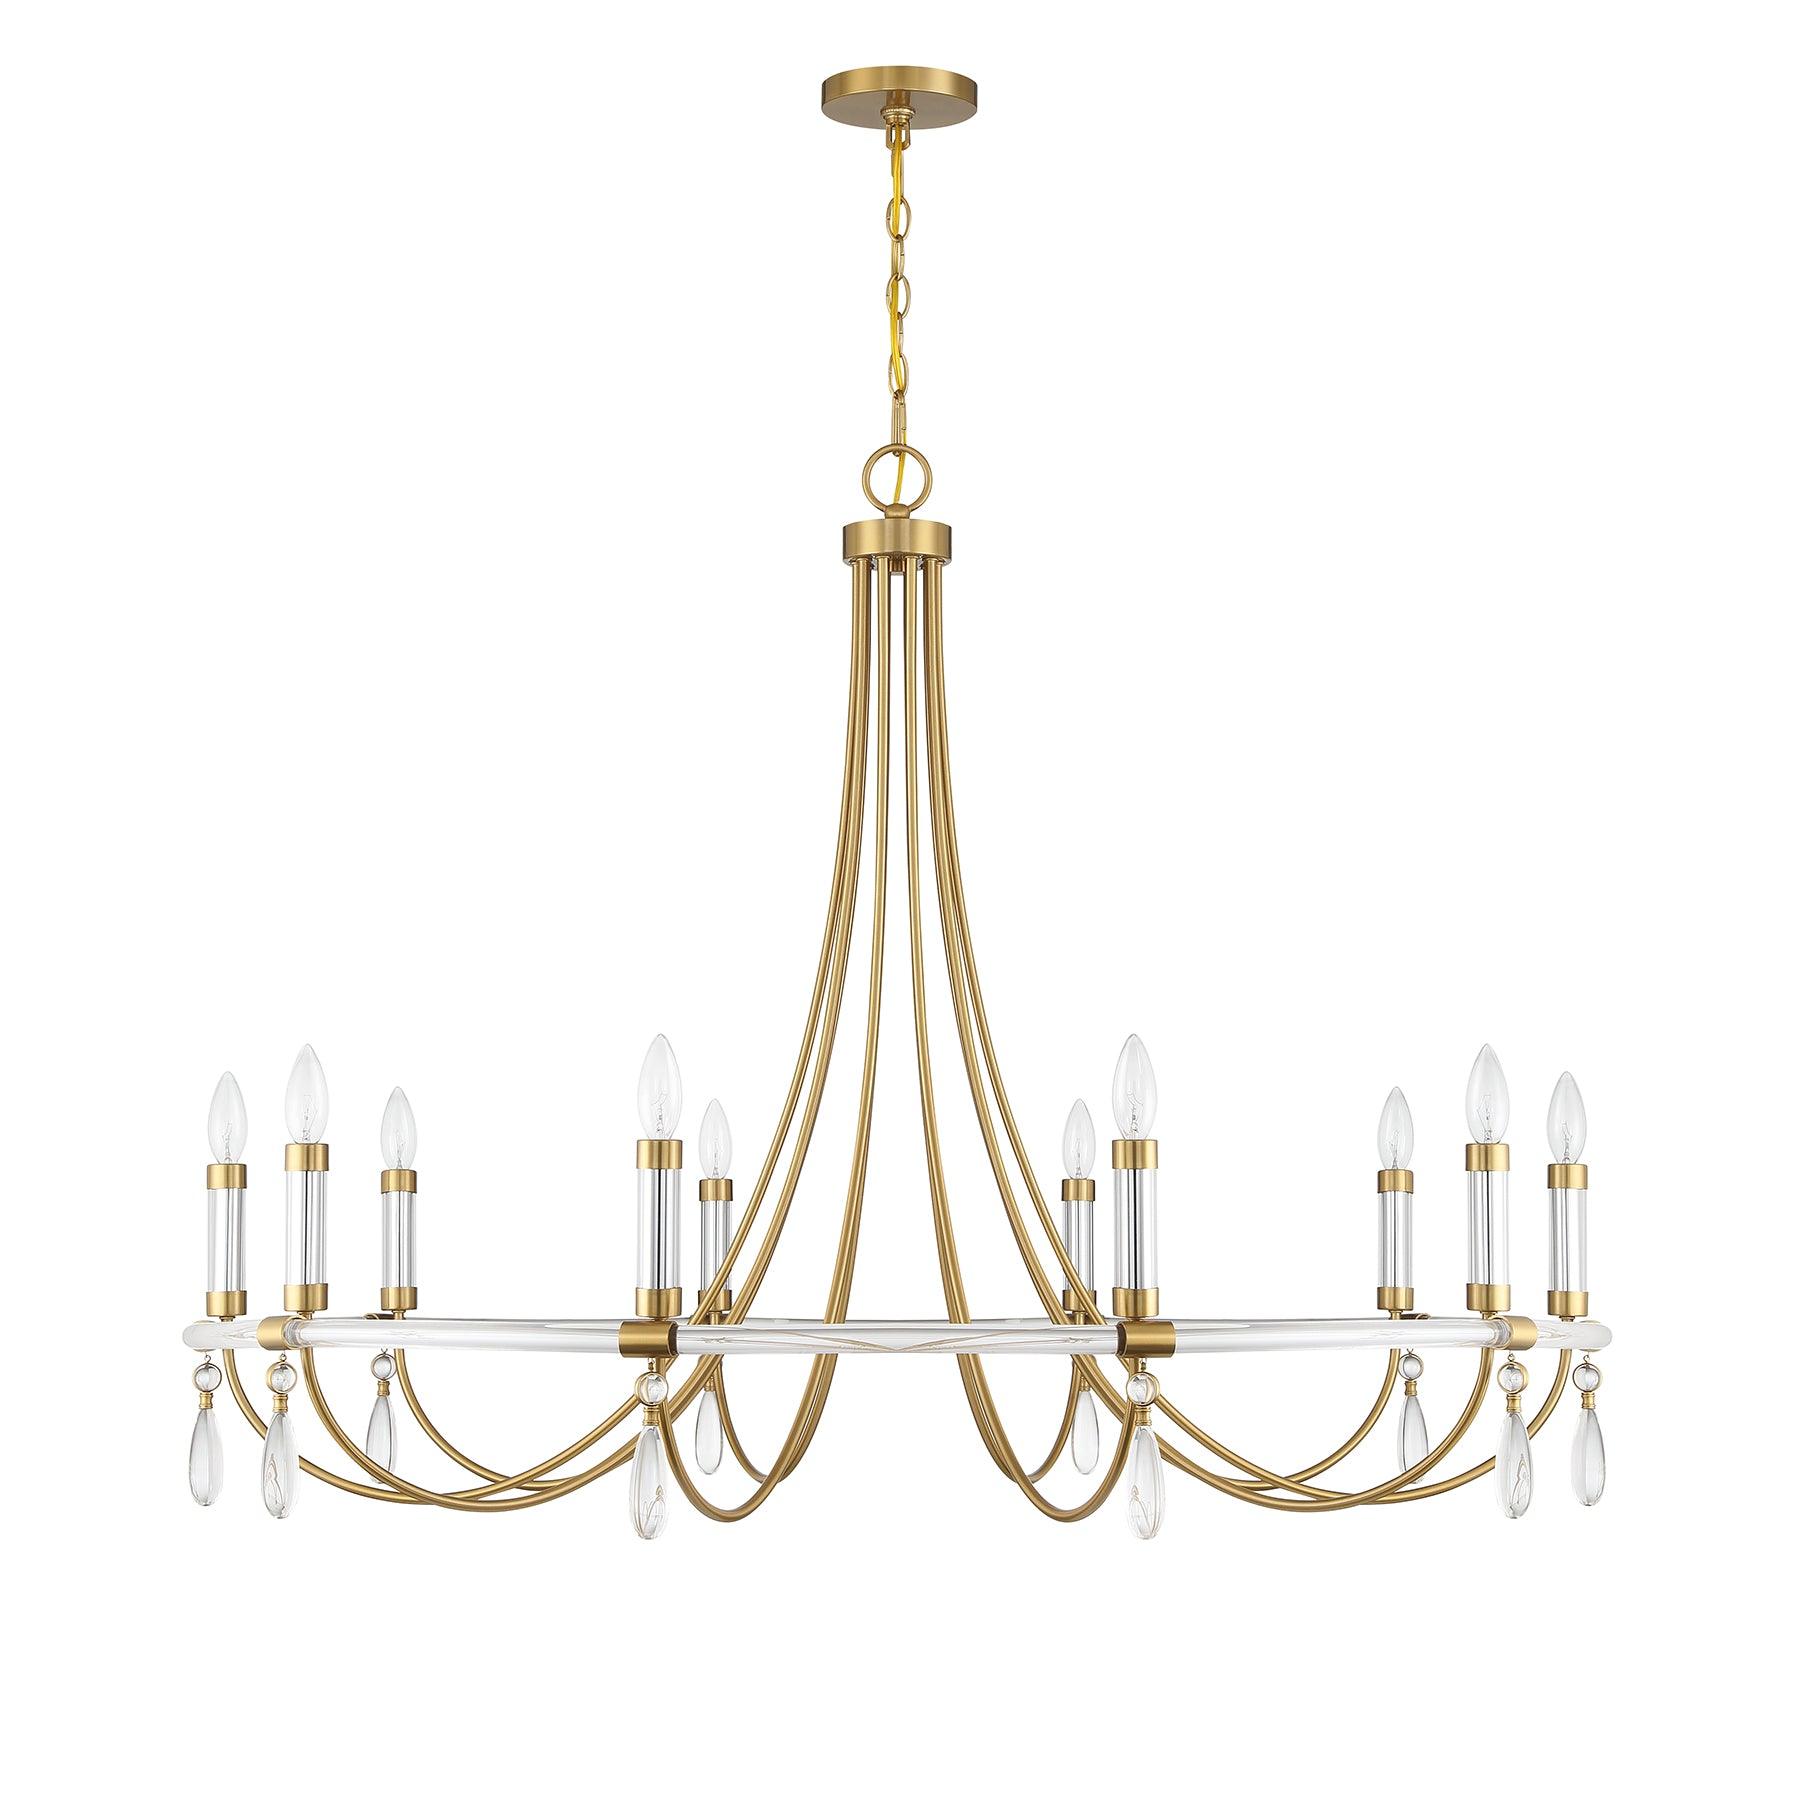 Mayfair 45 in. 10 Lights Chandelier Warm Brass and Chrome Finish